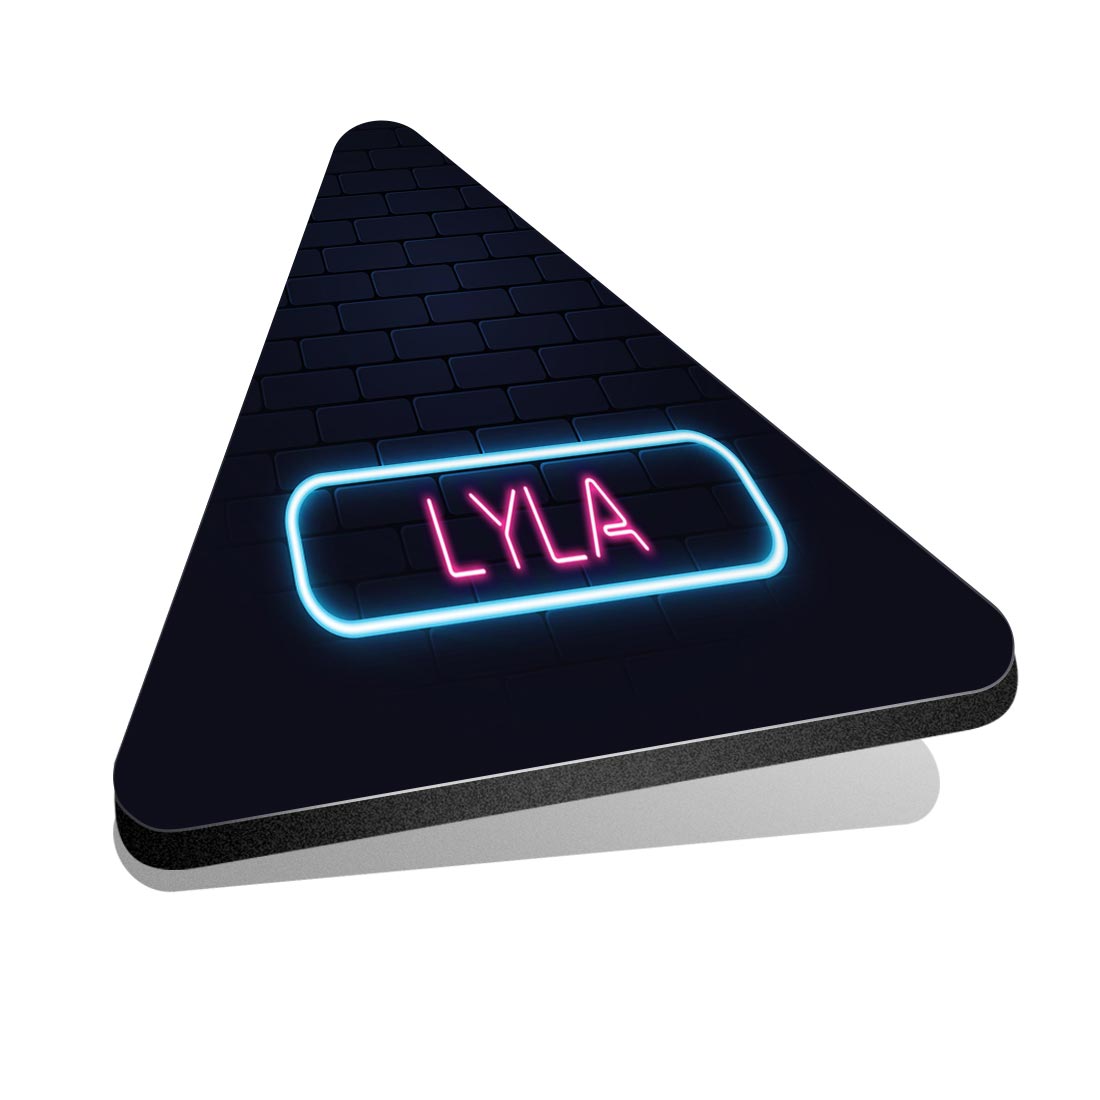 1x Triangle Fridge MDF Magnet Neon Sign Design Lyla Name #353265 - Picture 1 of 1